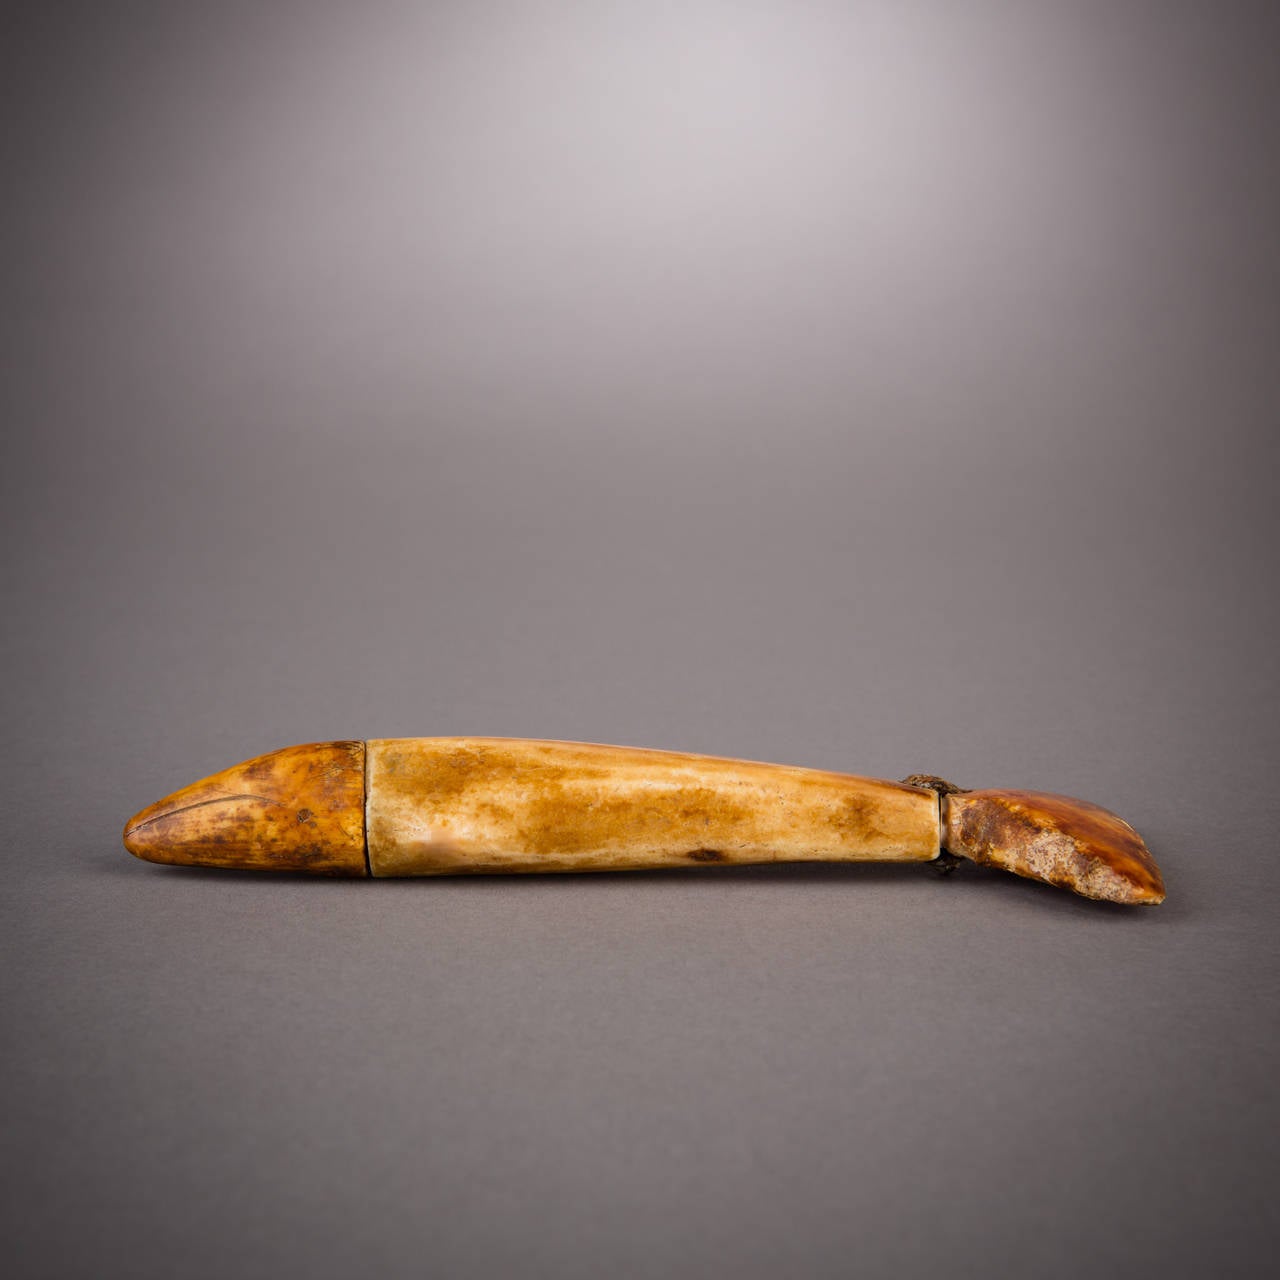 This whale amulet would have been carried in its owner's hunting bag. A simple yet complete image, this figurine expresses such an economy of detail and yet leaves nothing out. The warm, mottled patina the ivory has grown over centuries lends the